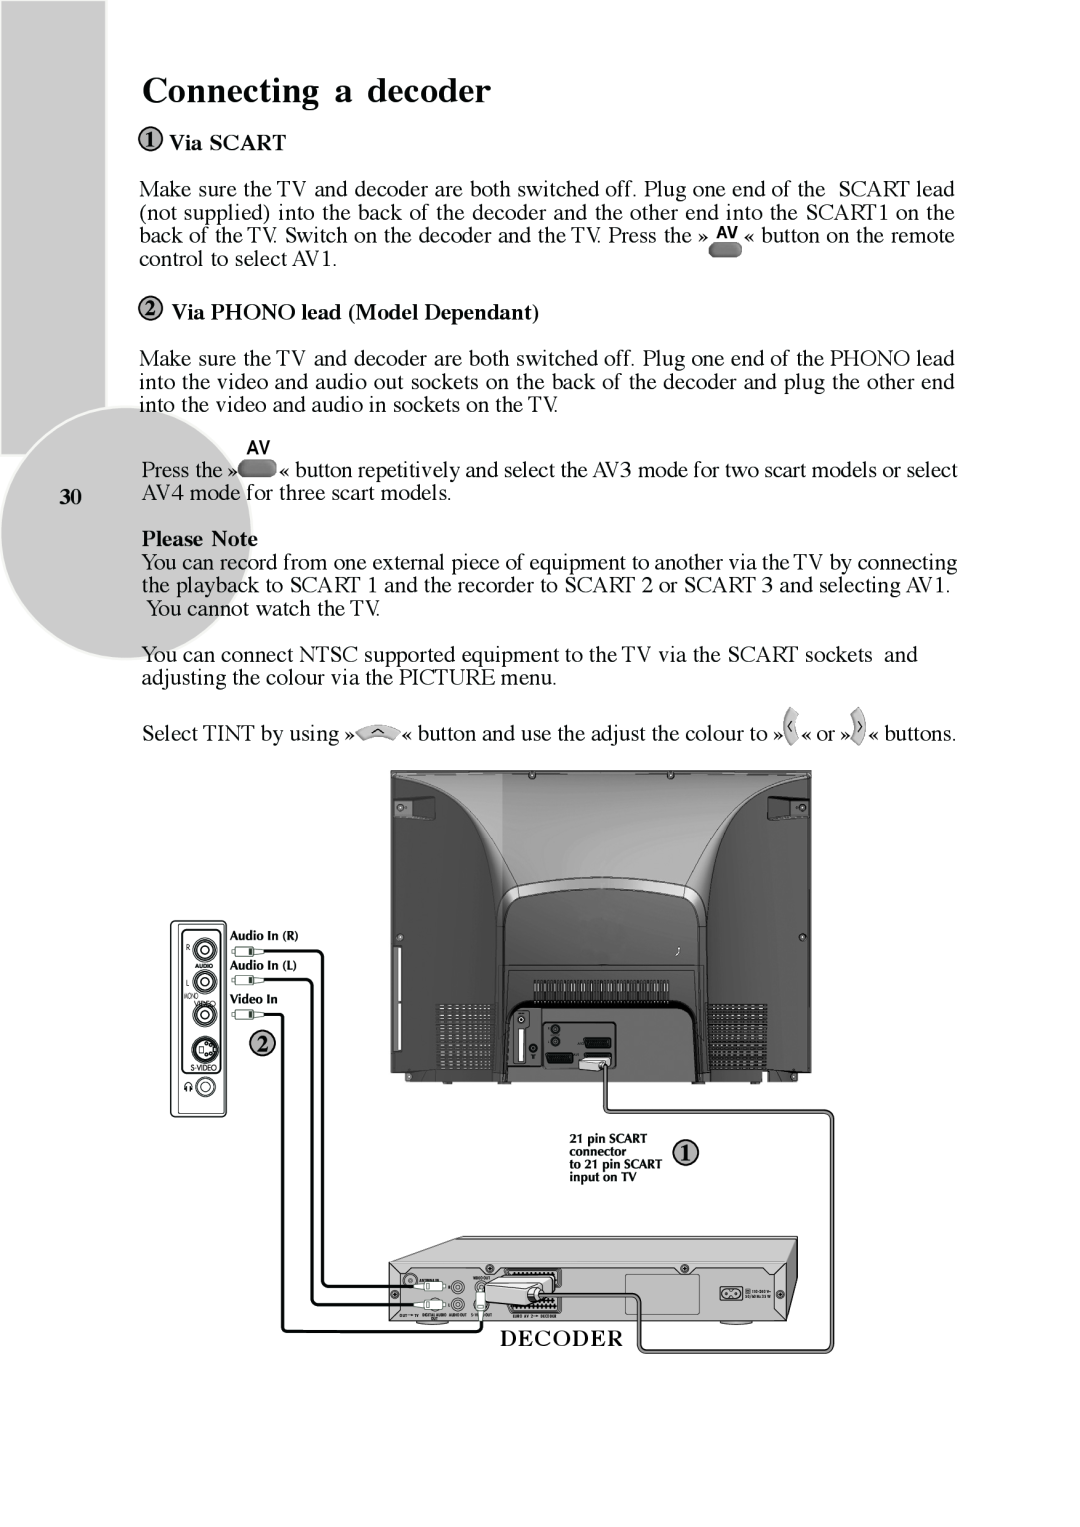 Beko 28C769IDS operating instructions Connecting a decoder, Decoder, Via SCART, Via PHONO lead Model Dependant, Please Note 